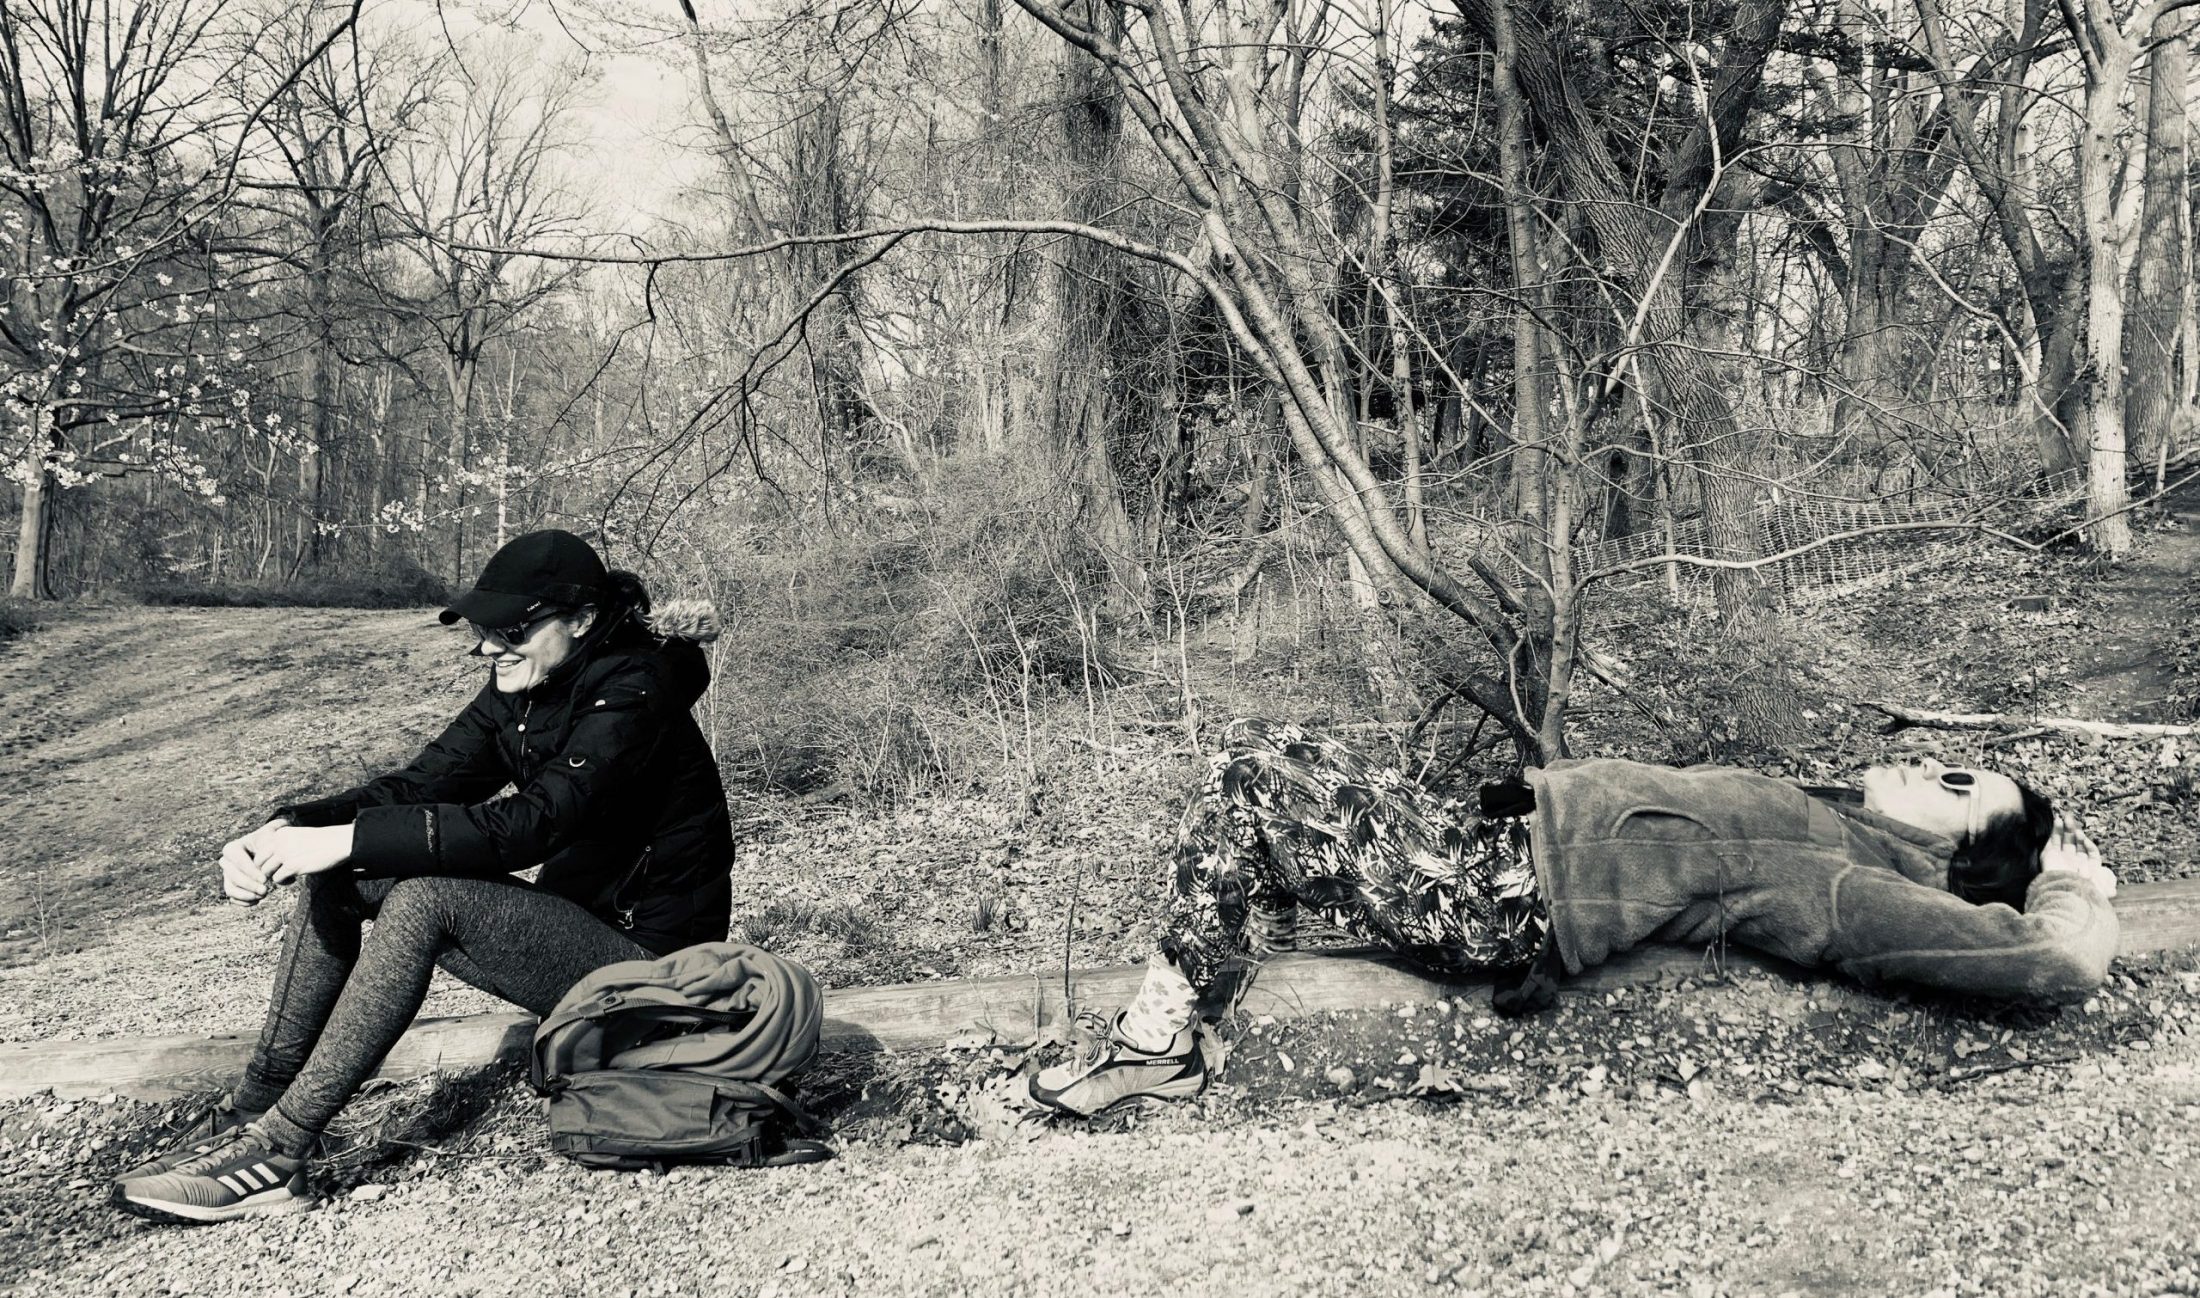 DC widow blog writer Marjorie Brimley in sits in woods with friend